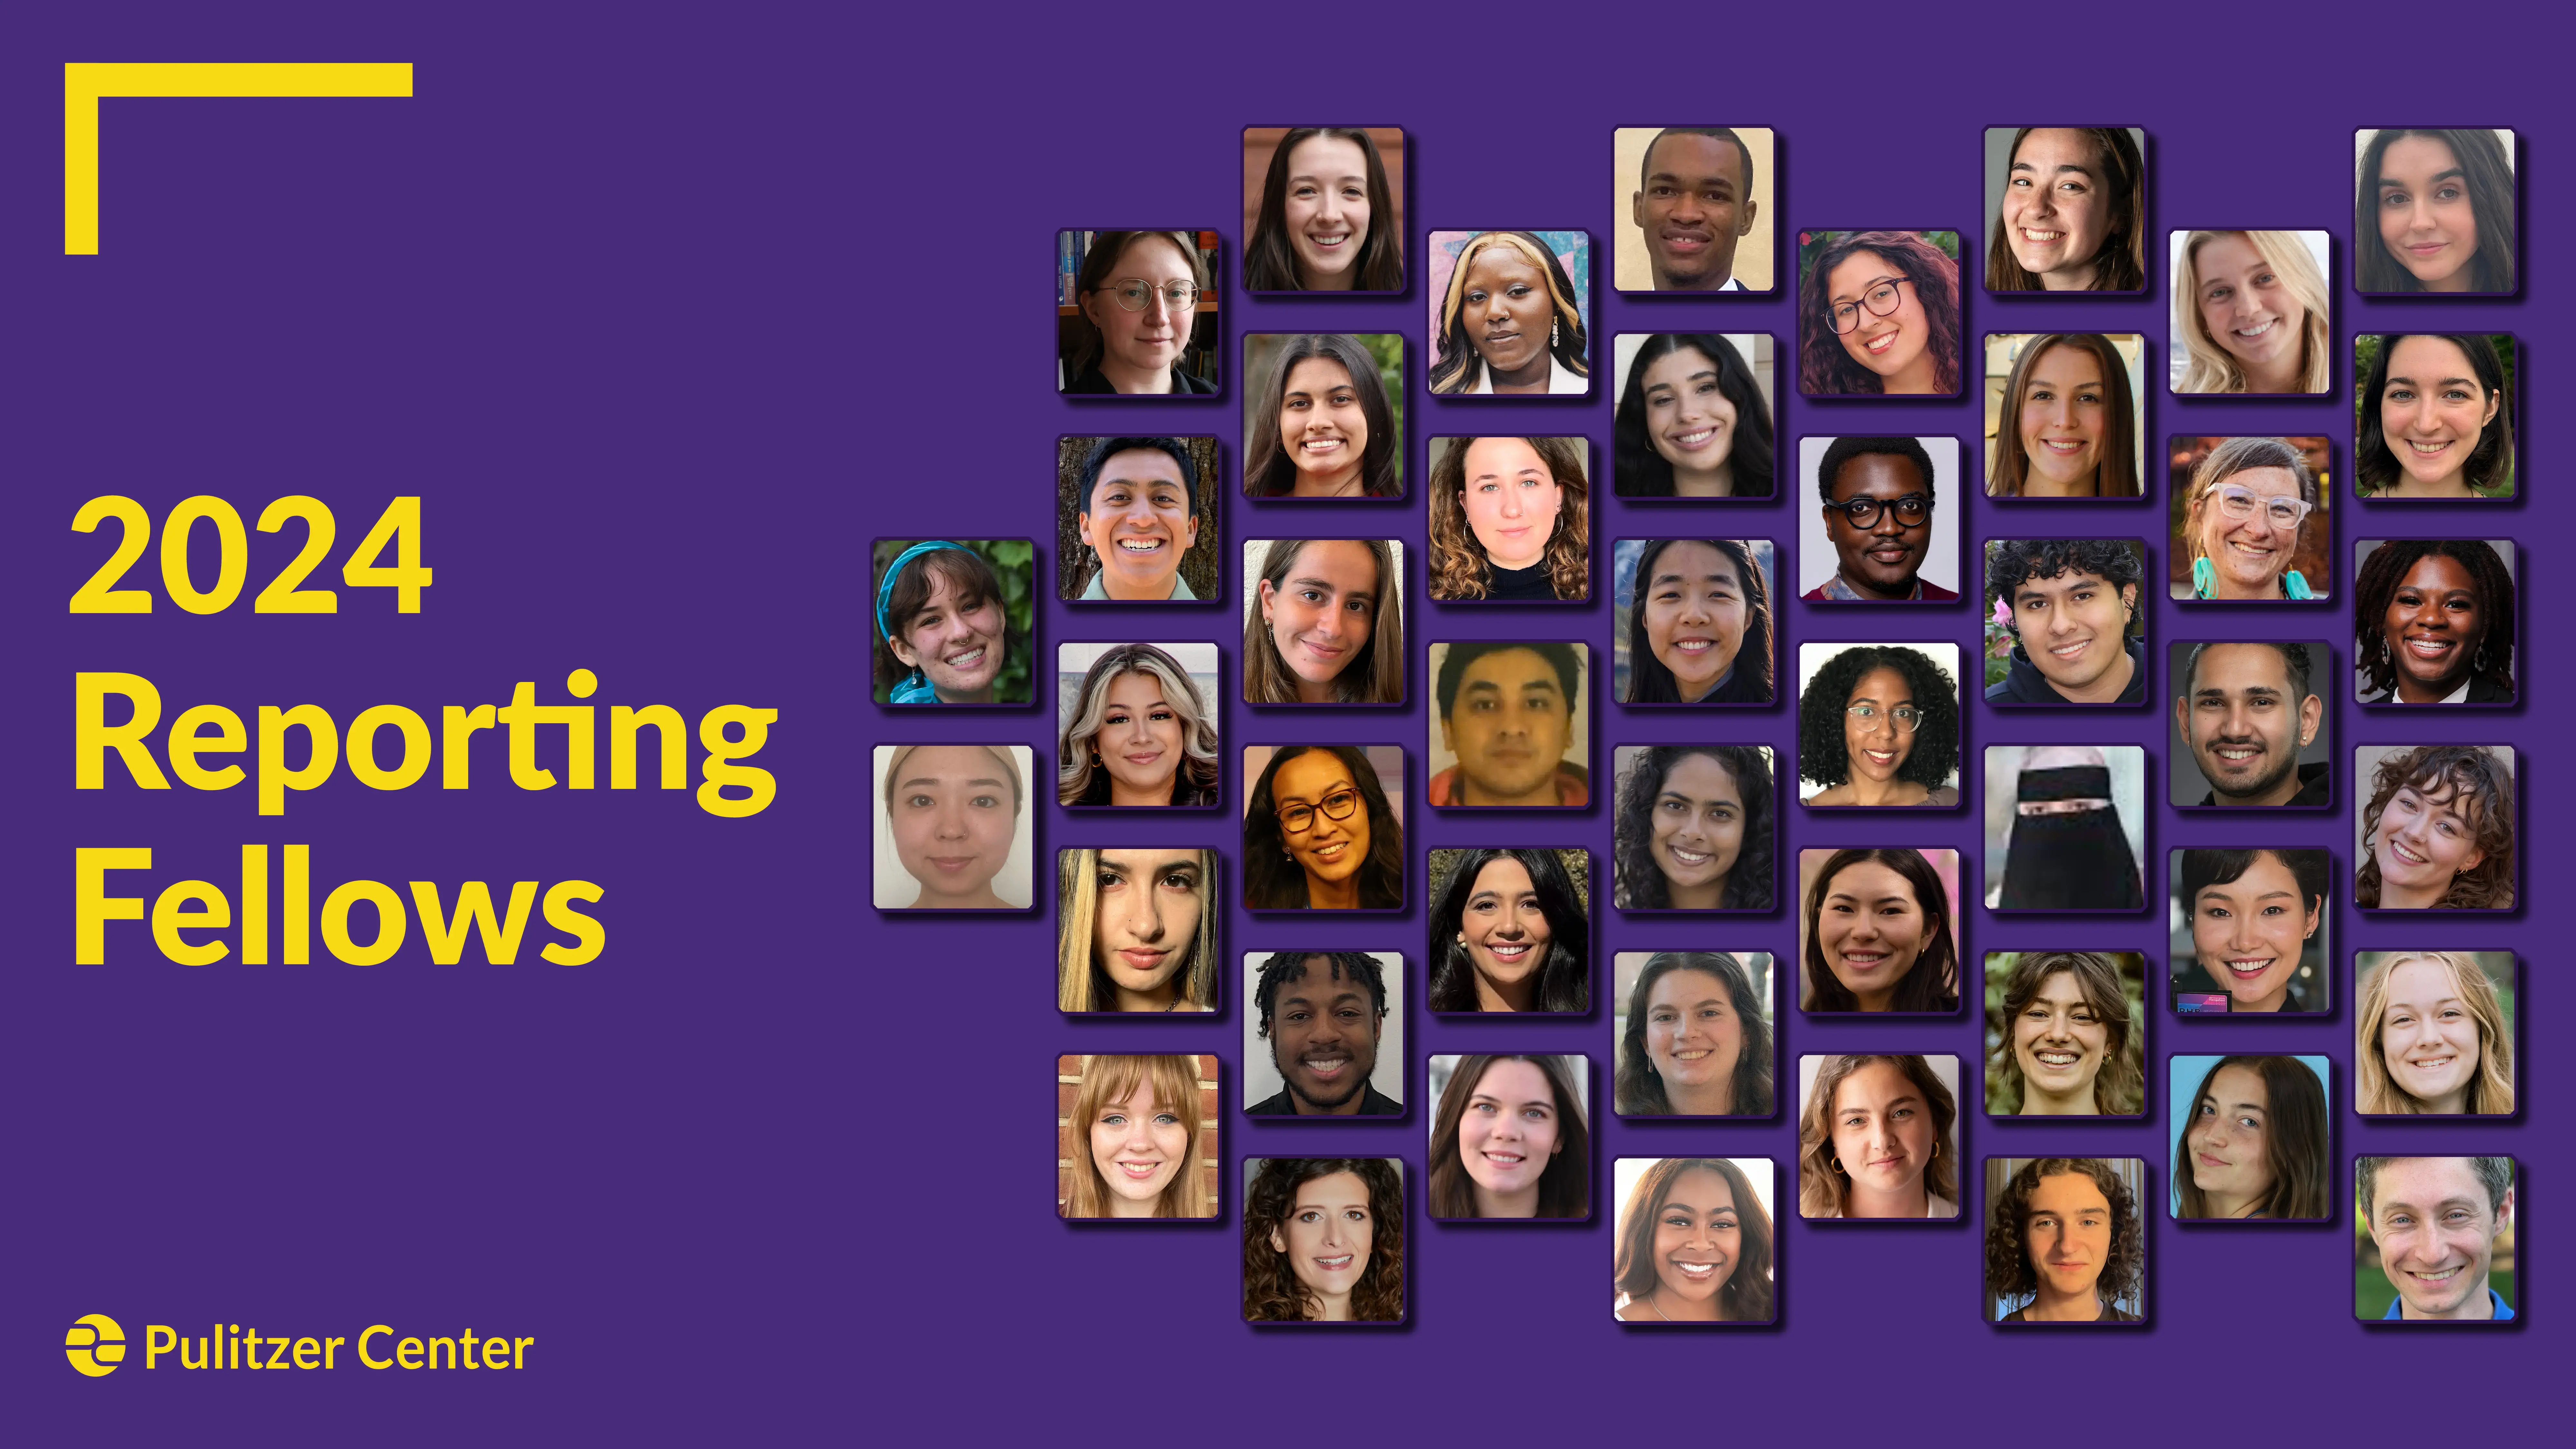 Congratulations to the 2024 cohort of Reporting Fellows. Graphic by Lucy Crelli. United States, 2024.